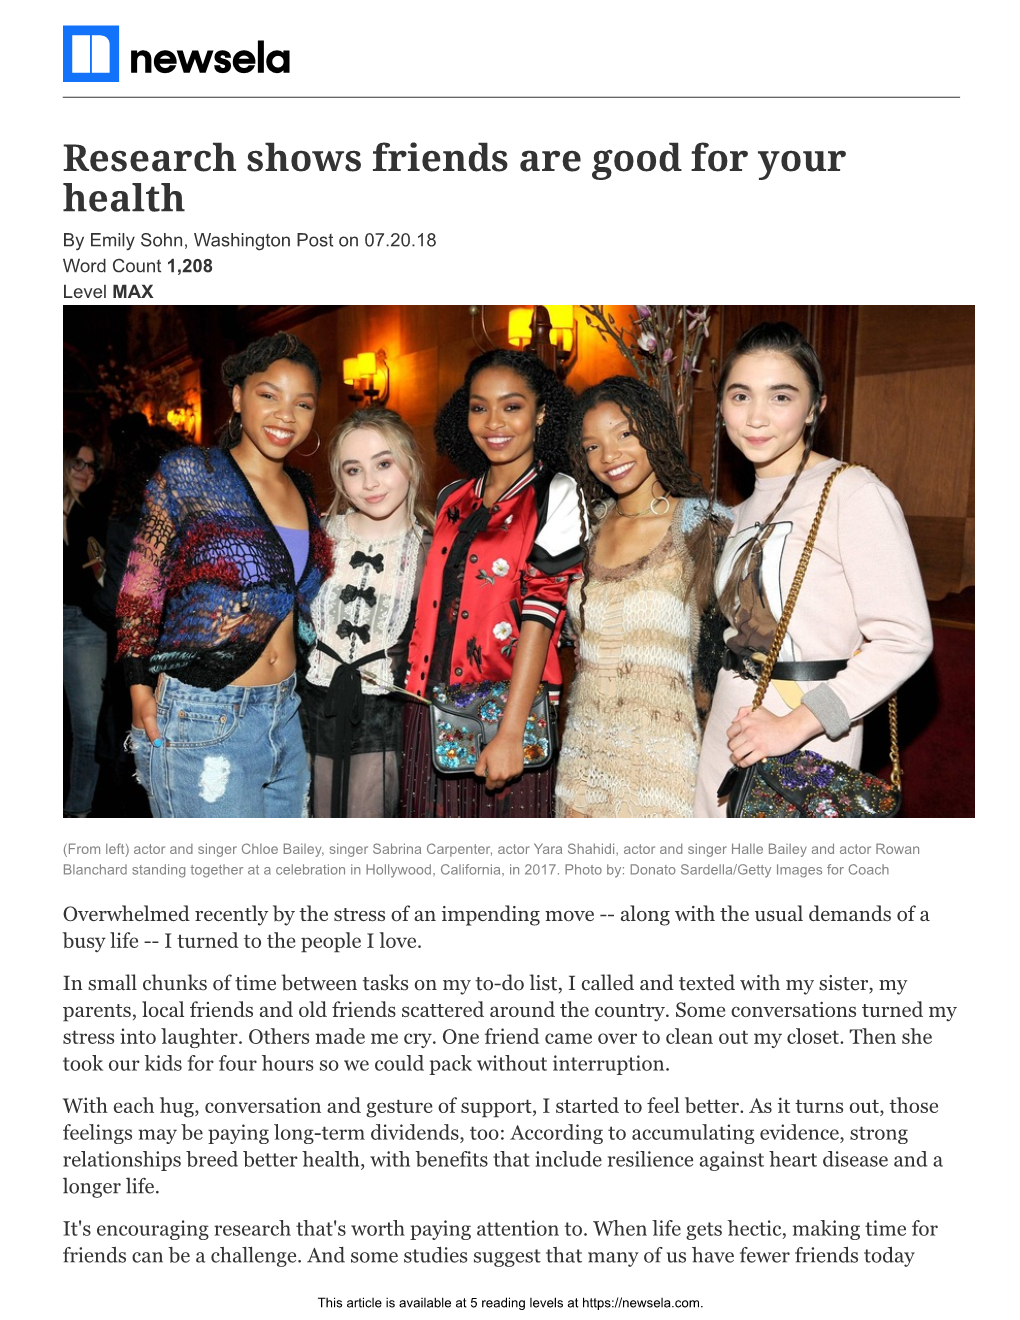 Research Shows Friends Are Good for Your Health by Emily Sohn, Washington Post on 07.20.18 Word Count 1,208 Level MAX